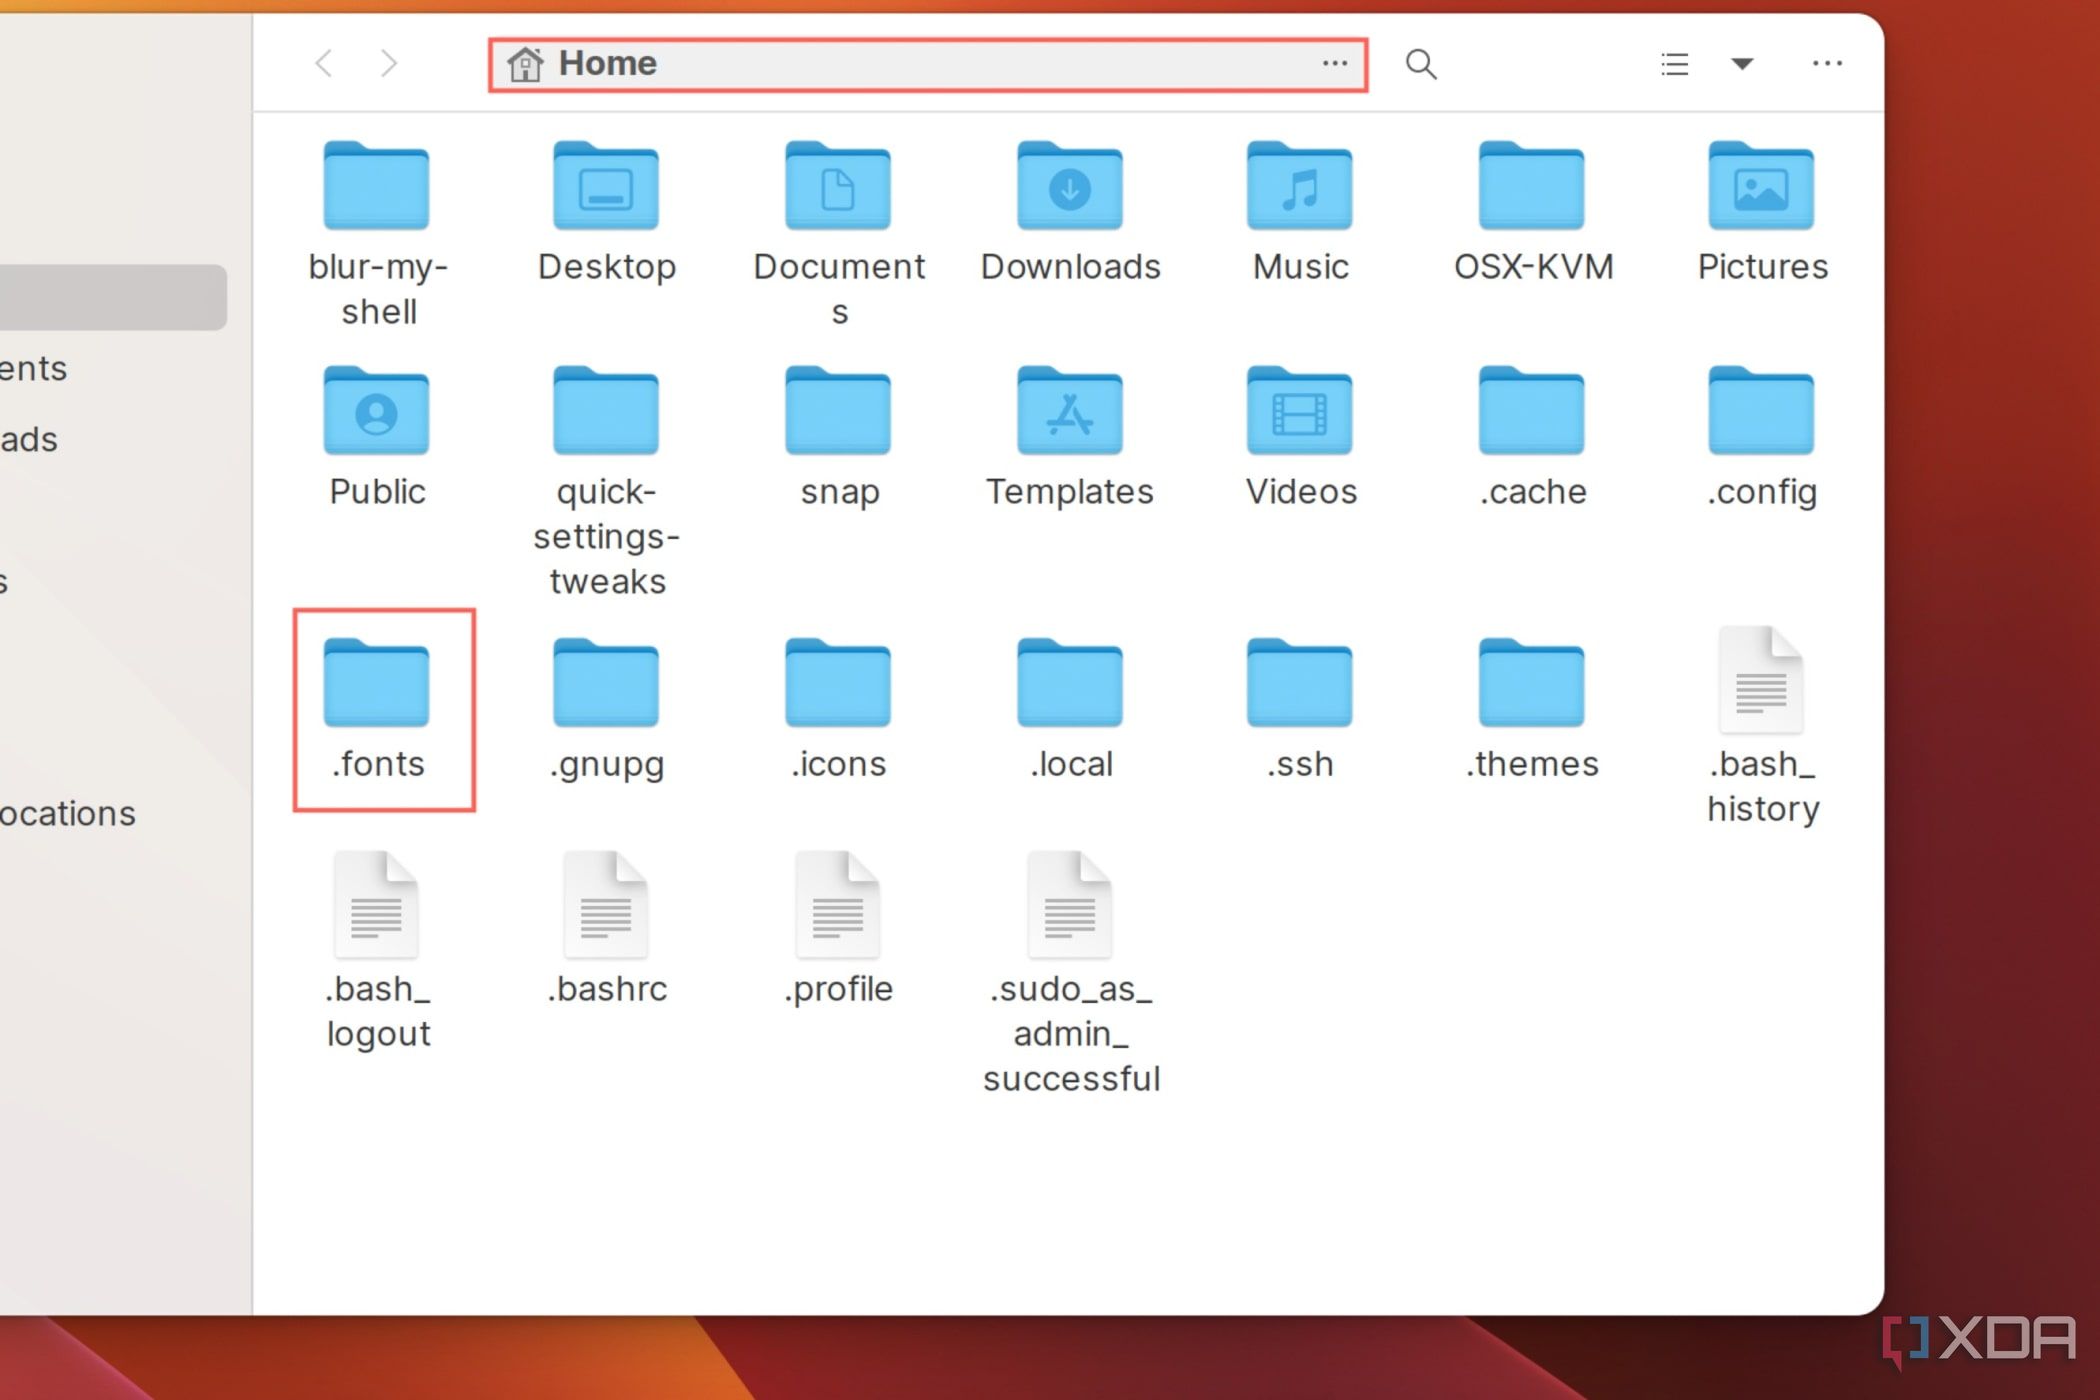 A screenshot of the Ubuntu File Manager with the Home directory and .fonts folder highlighted